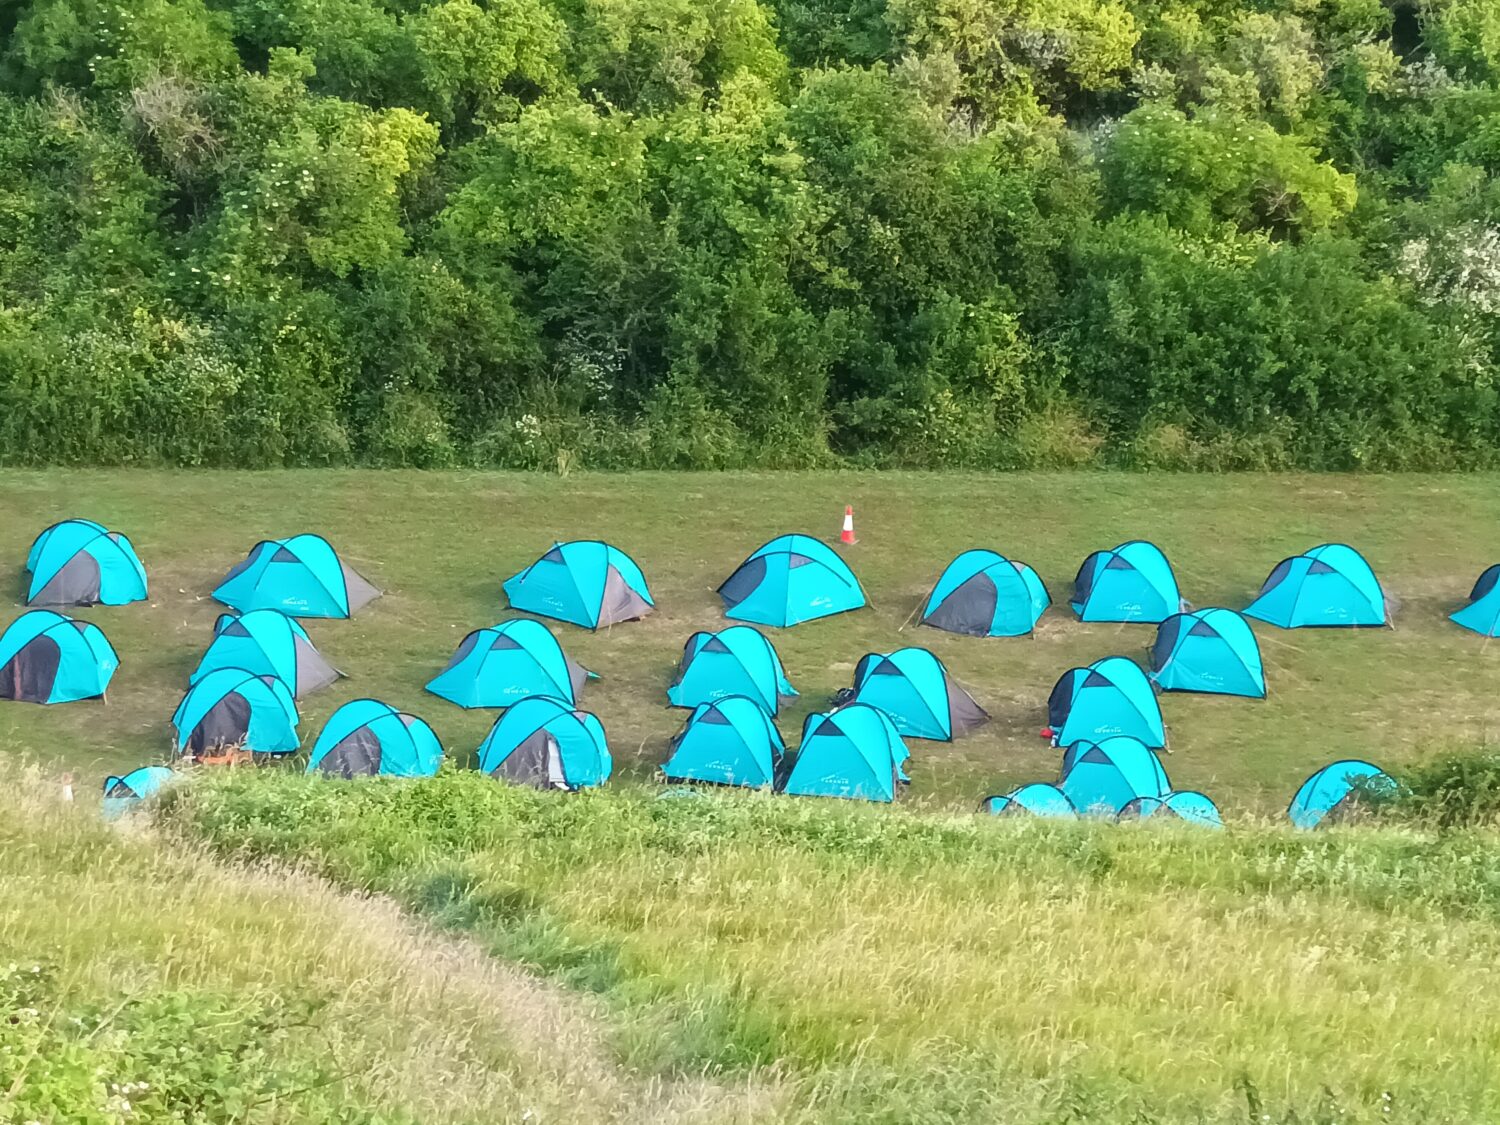 A group of tents full of students in a field surrounded by trees